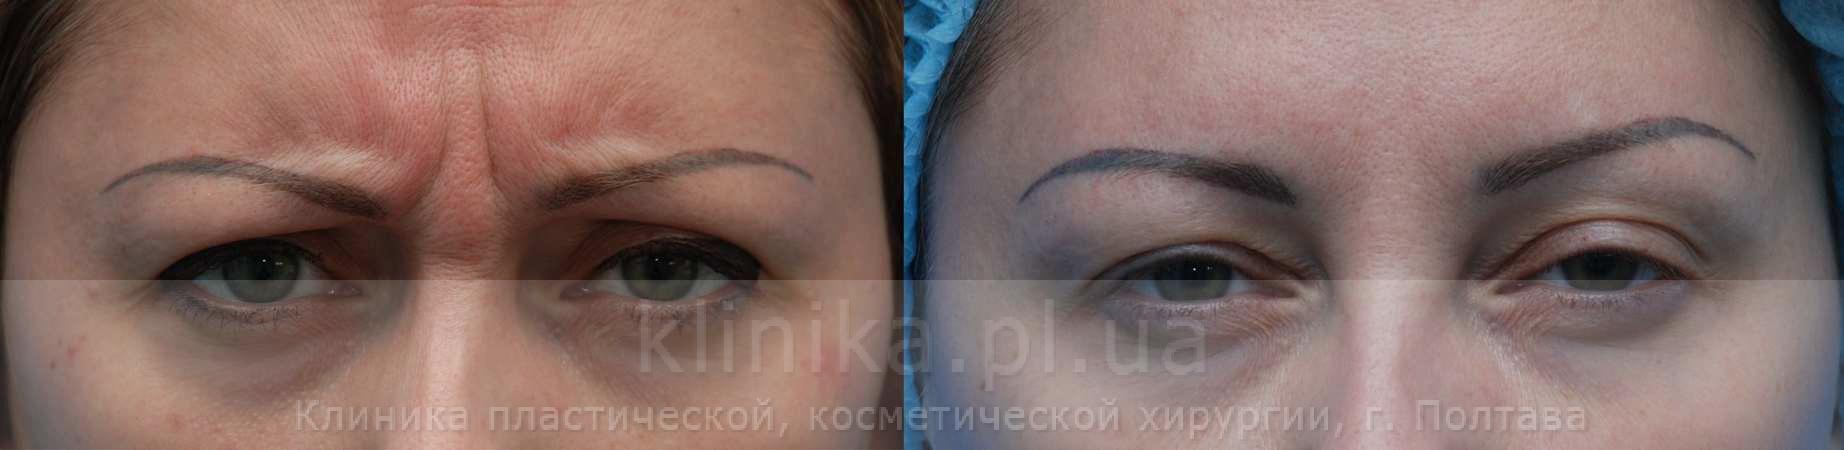 The correction of mimic wrinkles.